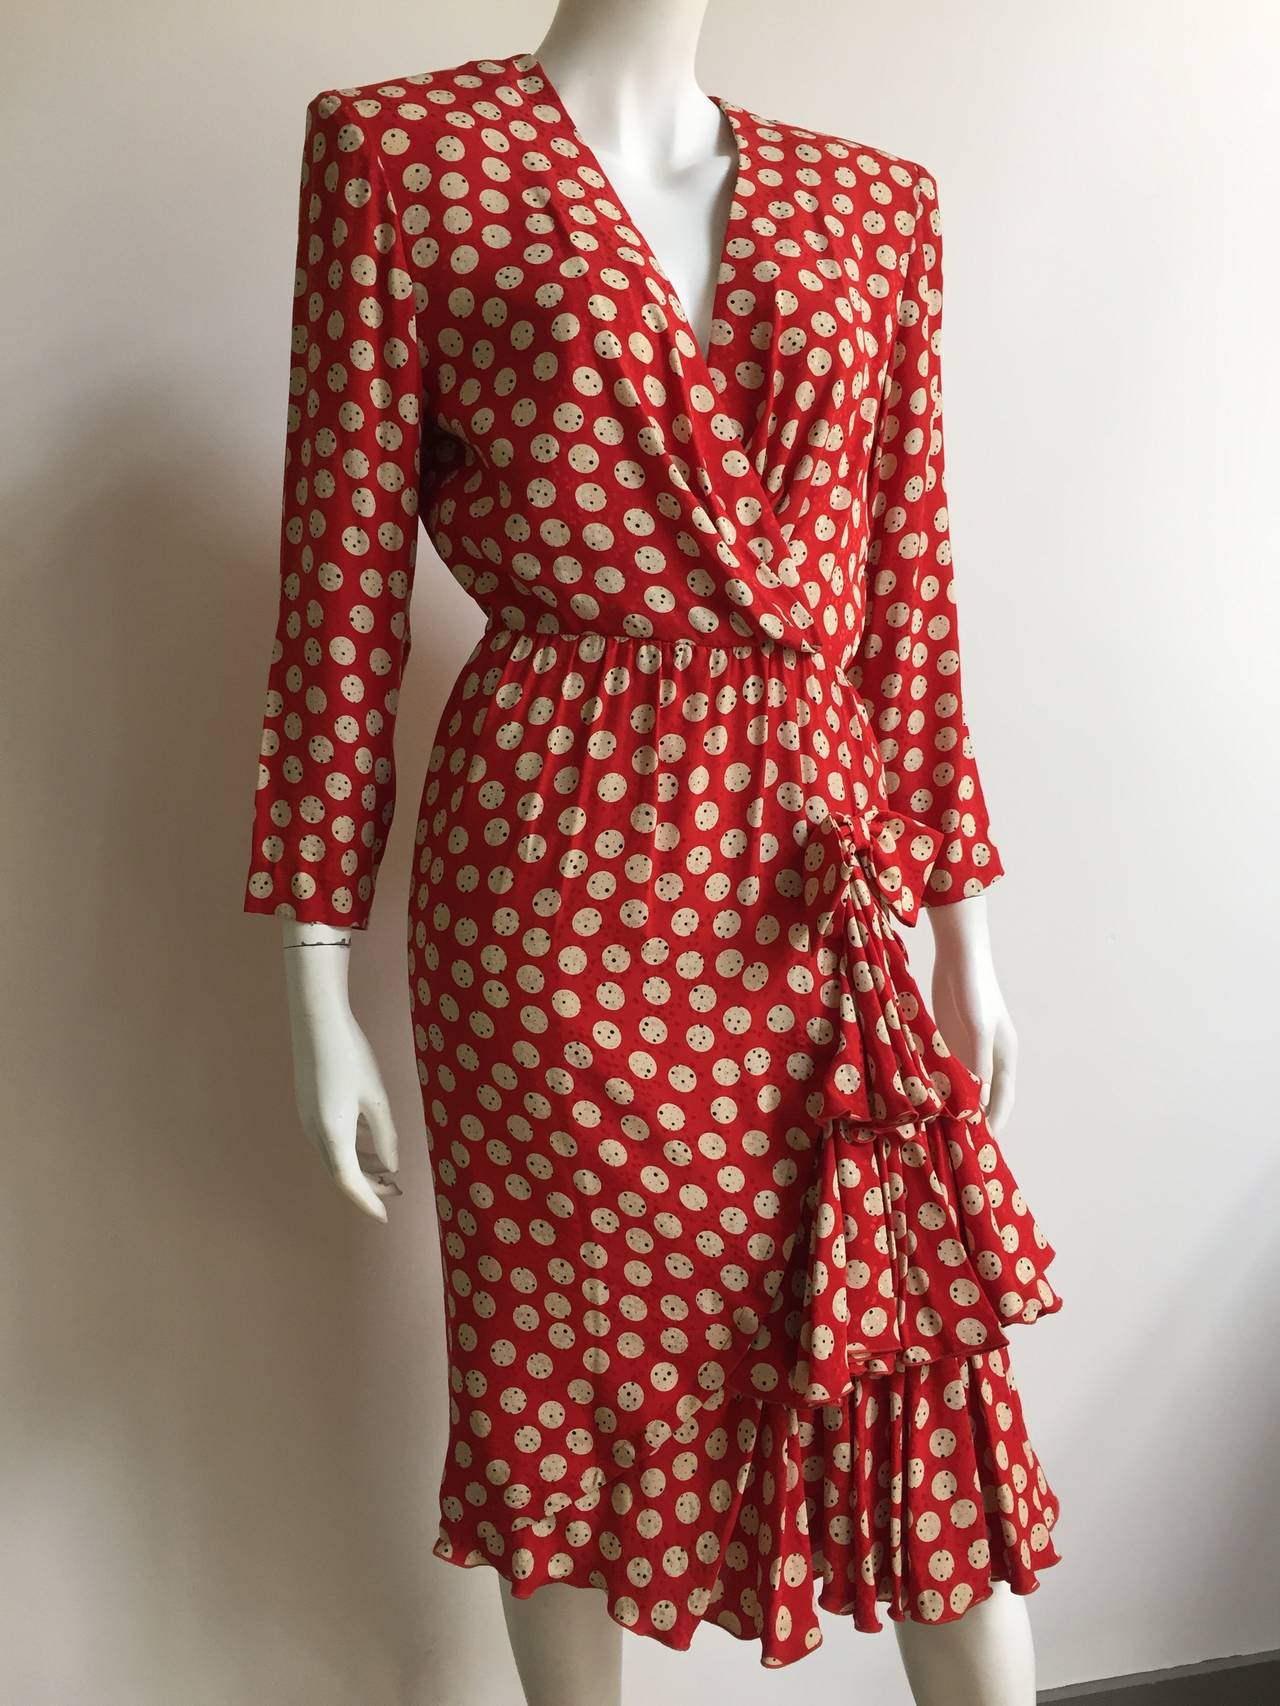 Pierre Balmain Ivoire 1980s red silk polka dot dress French size 38 fits like a US size 6 ( Please see & use measurements to make sure this fits your body perfectly). Dress was never worn still with tag. Dress is lined. Bow tier drop ruffles on